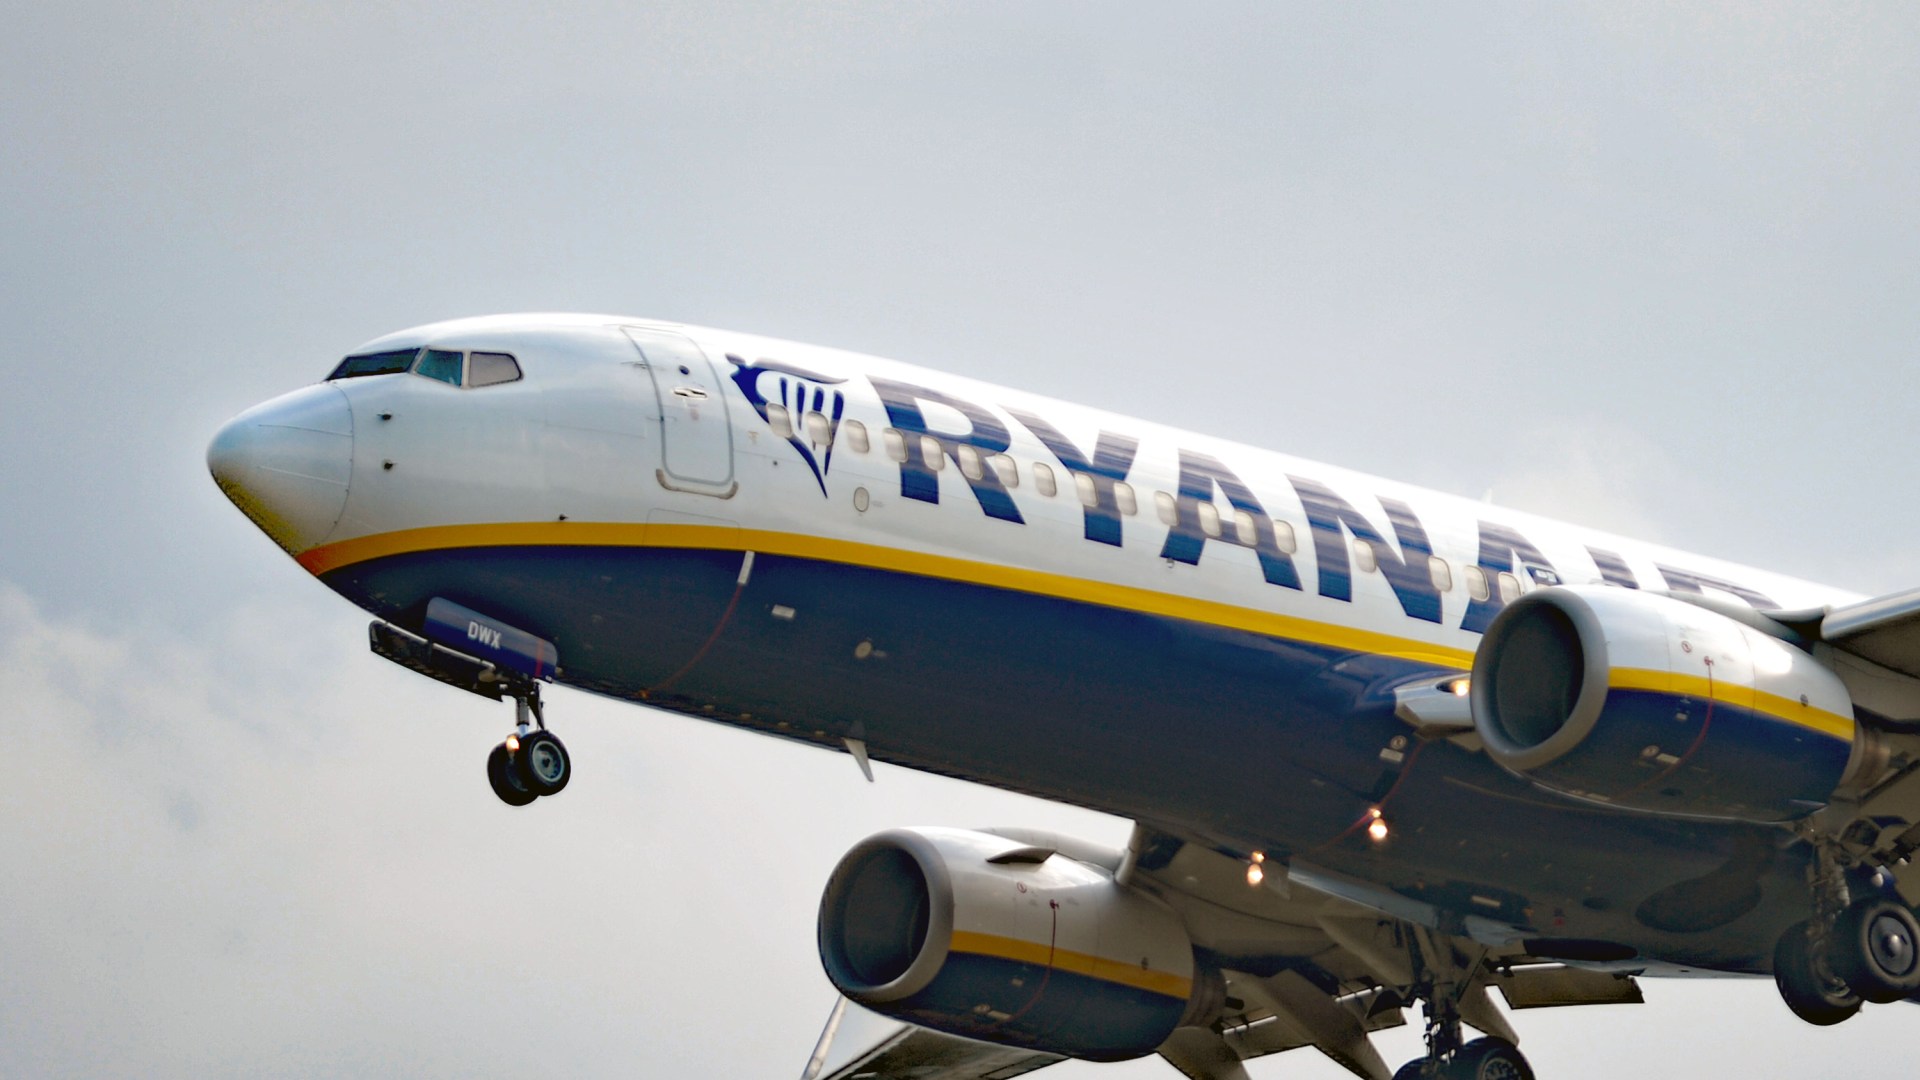 Ryanair’s European Flight Cancellations and Ticket Price Hikes: What You Need to Know